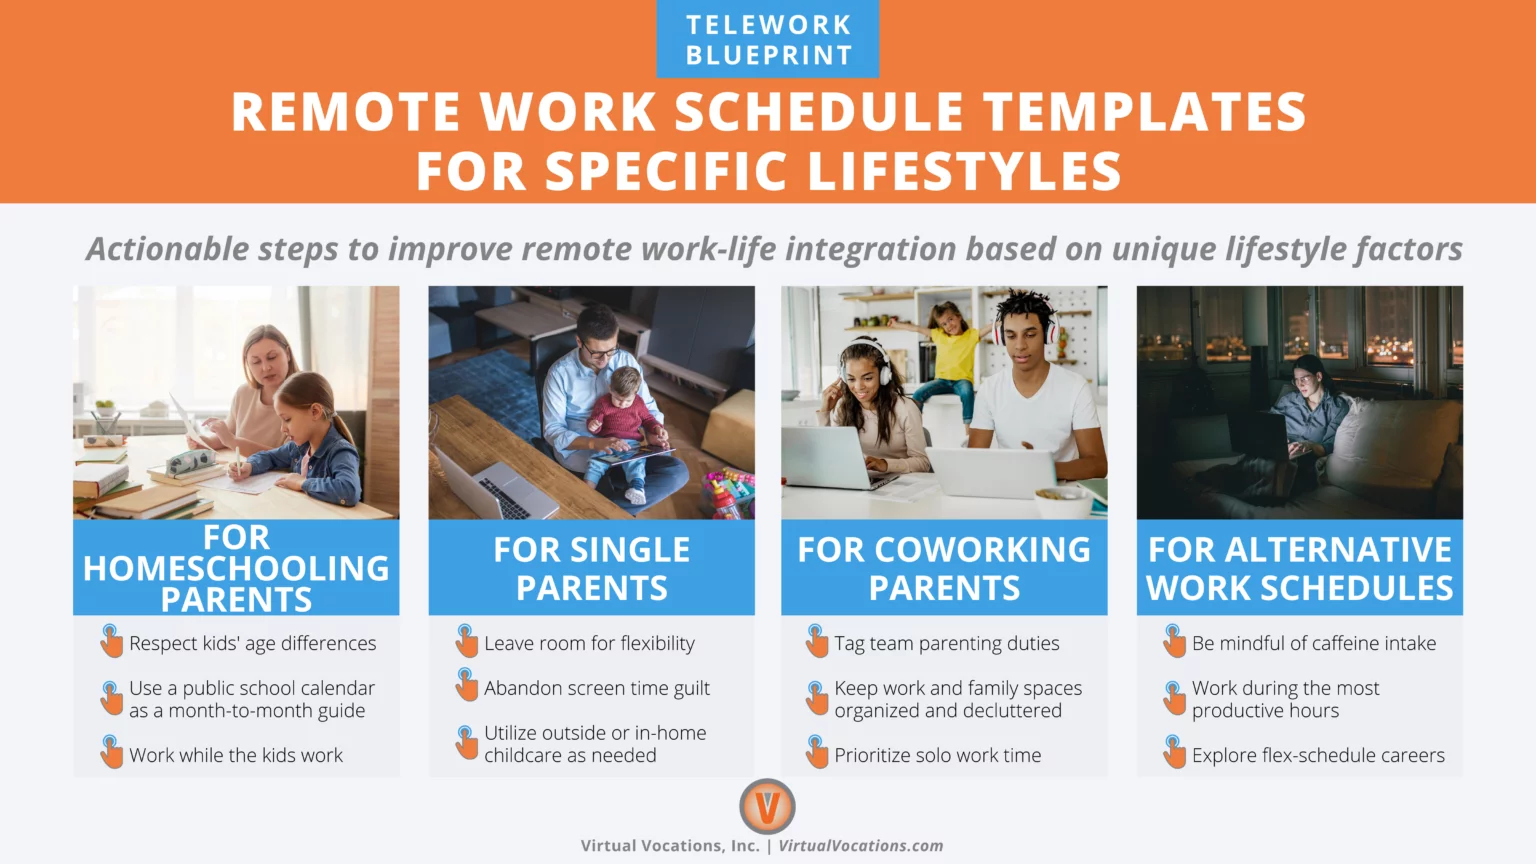 Virtual-Vocations_Remote-Work-Schedule-Templates-for-Specific-Lifestyles_Blog-1536x864